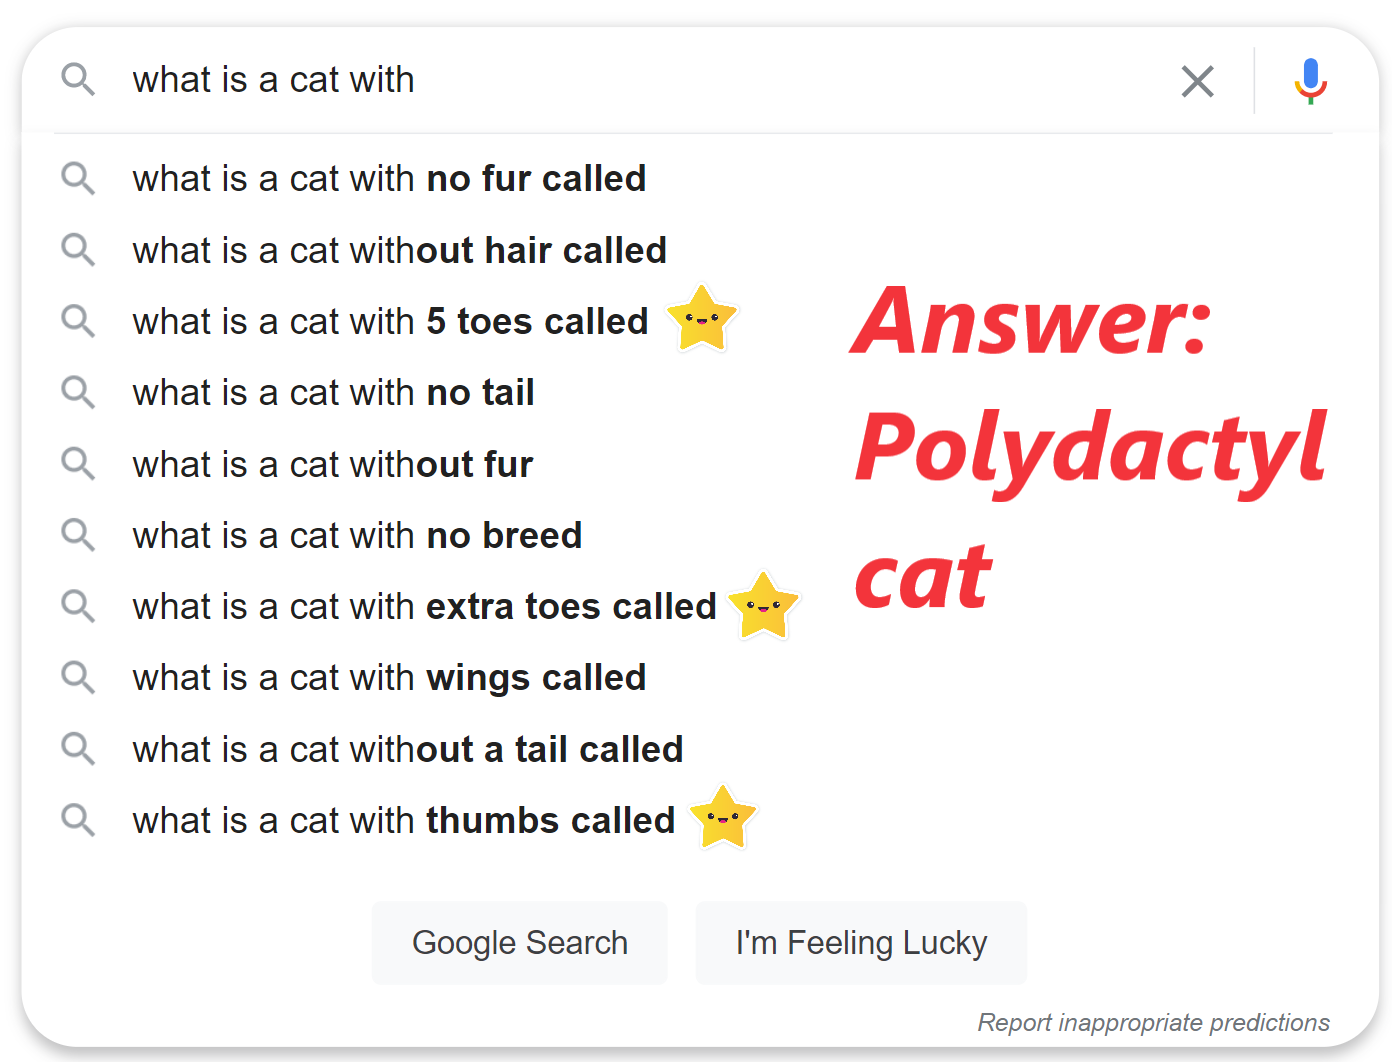 What is a cat with extra toes called answer polydactyl cat